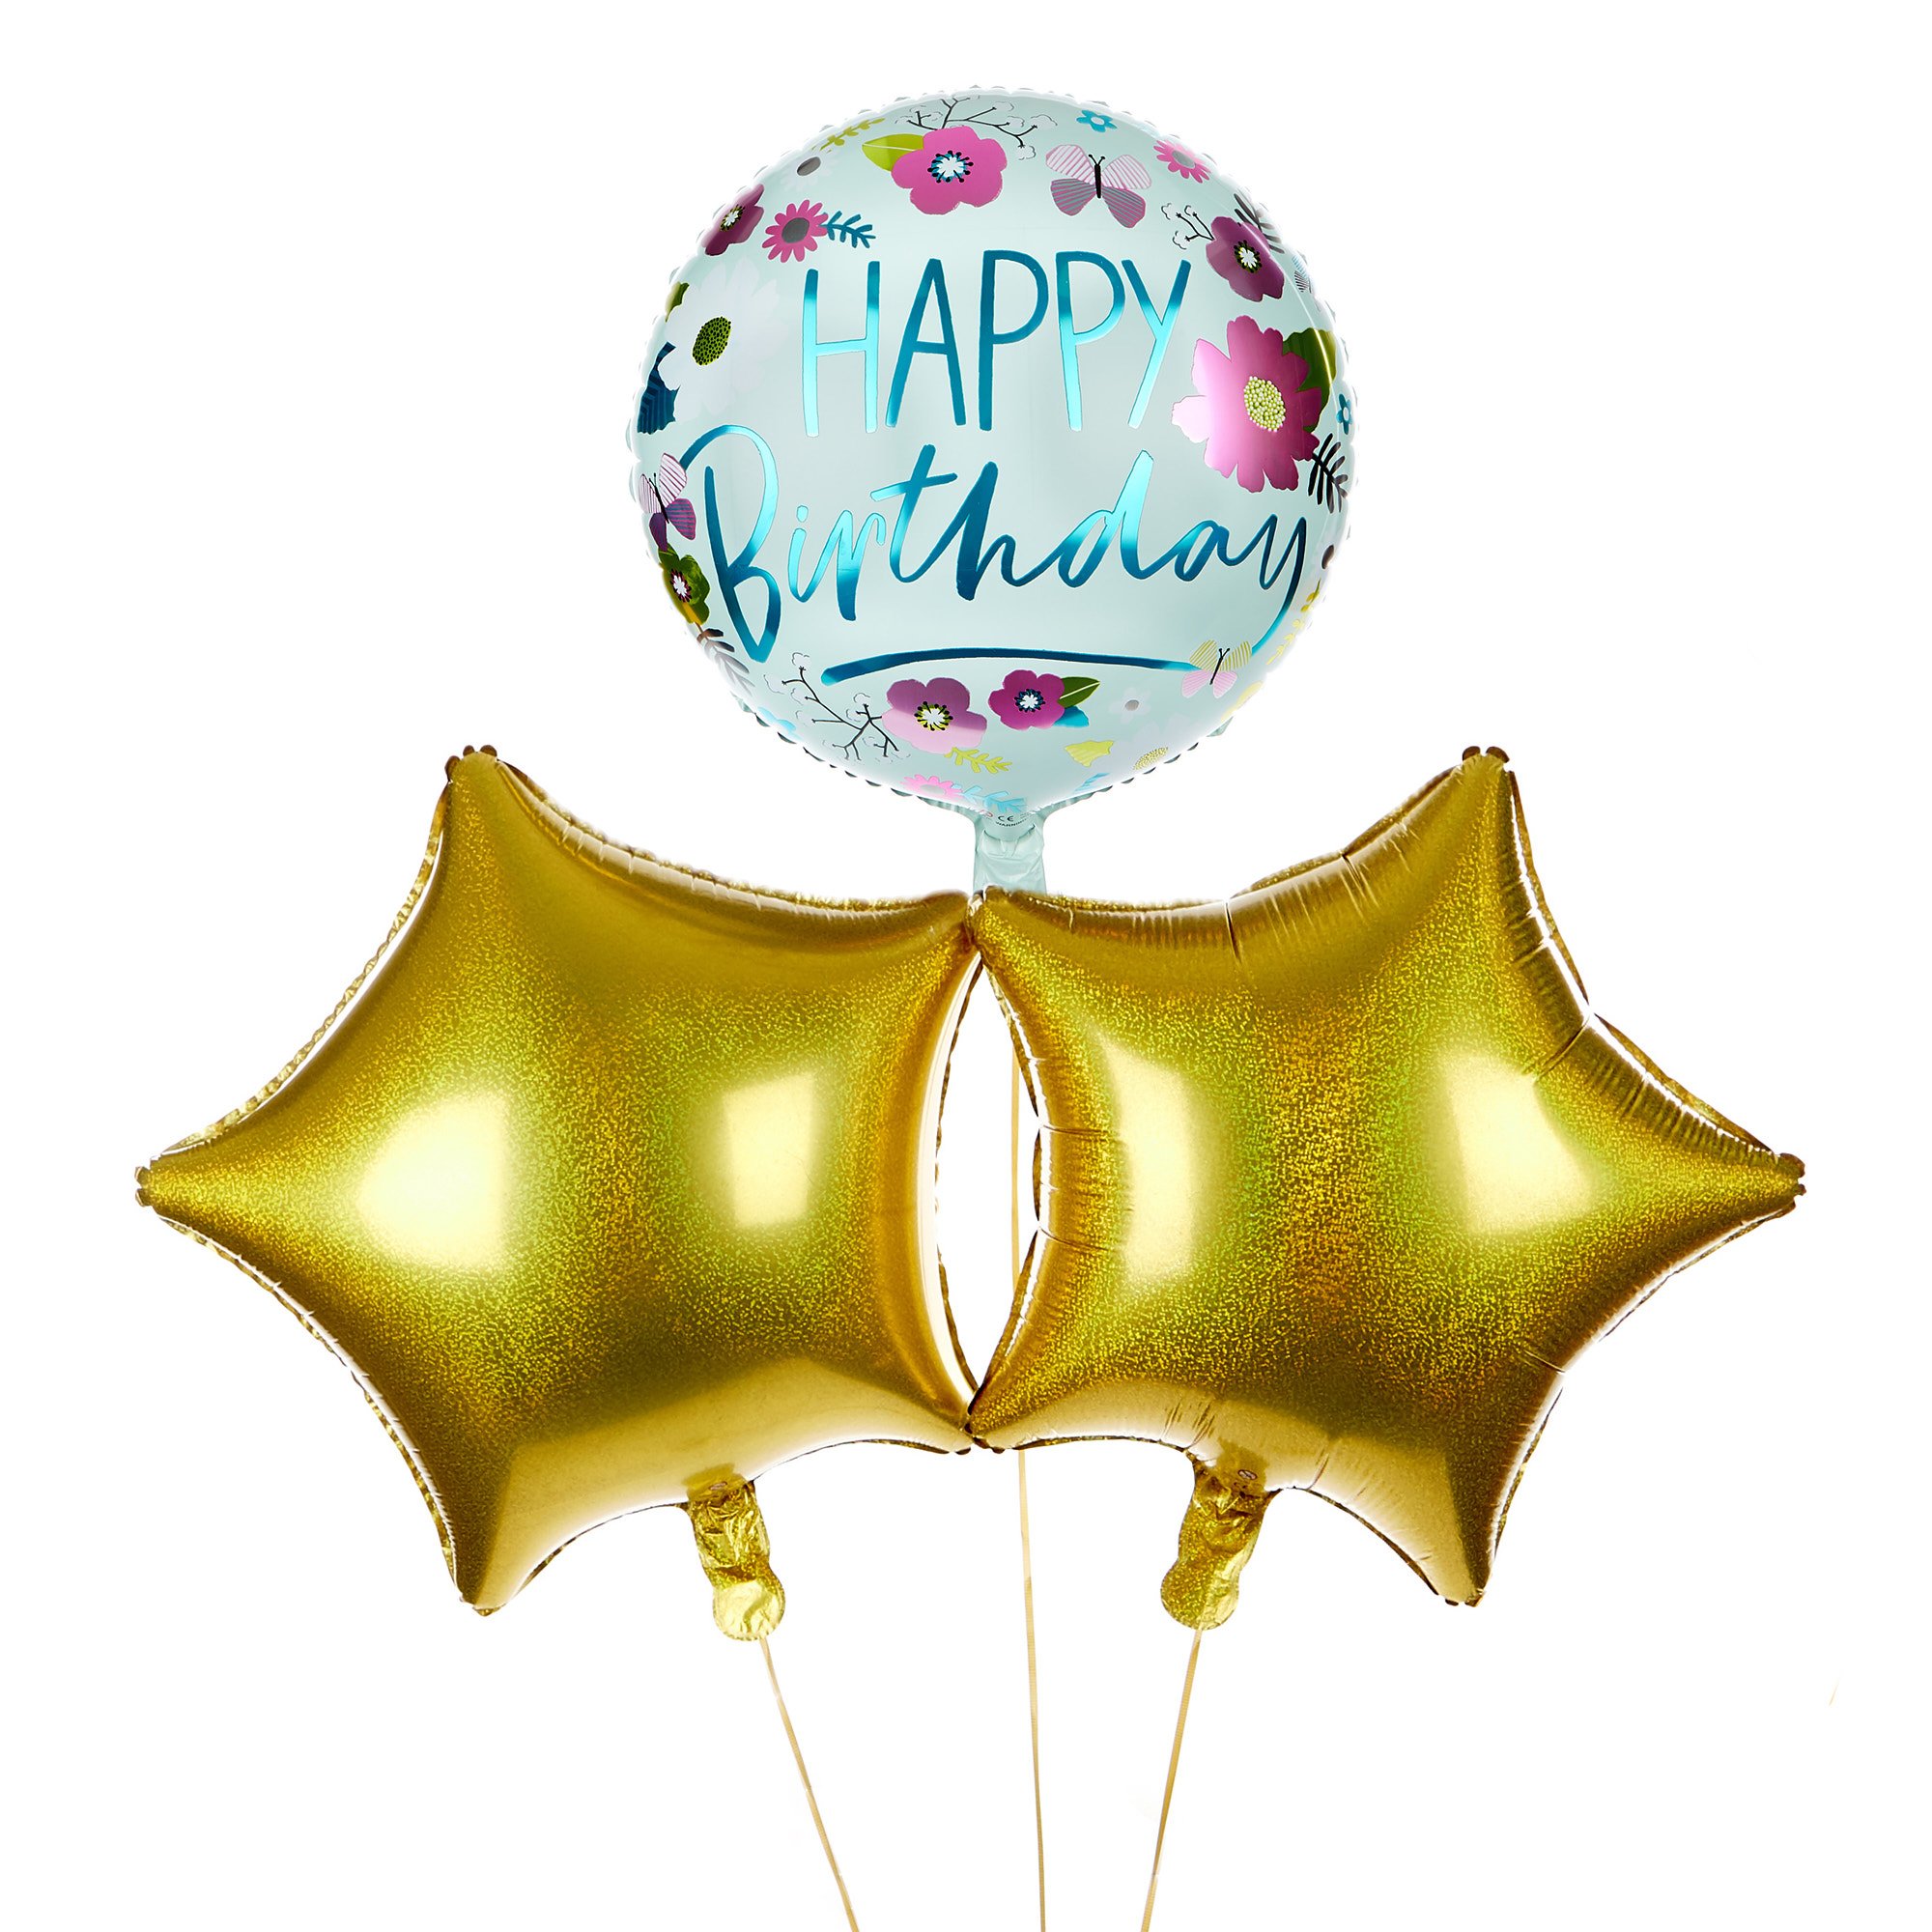 Floral Happy Birthday Balloon Bouquet - DELIVERED INFLATED!